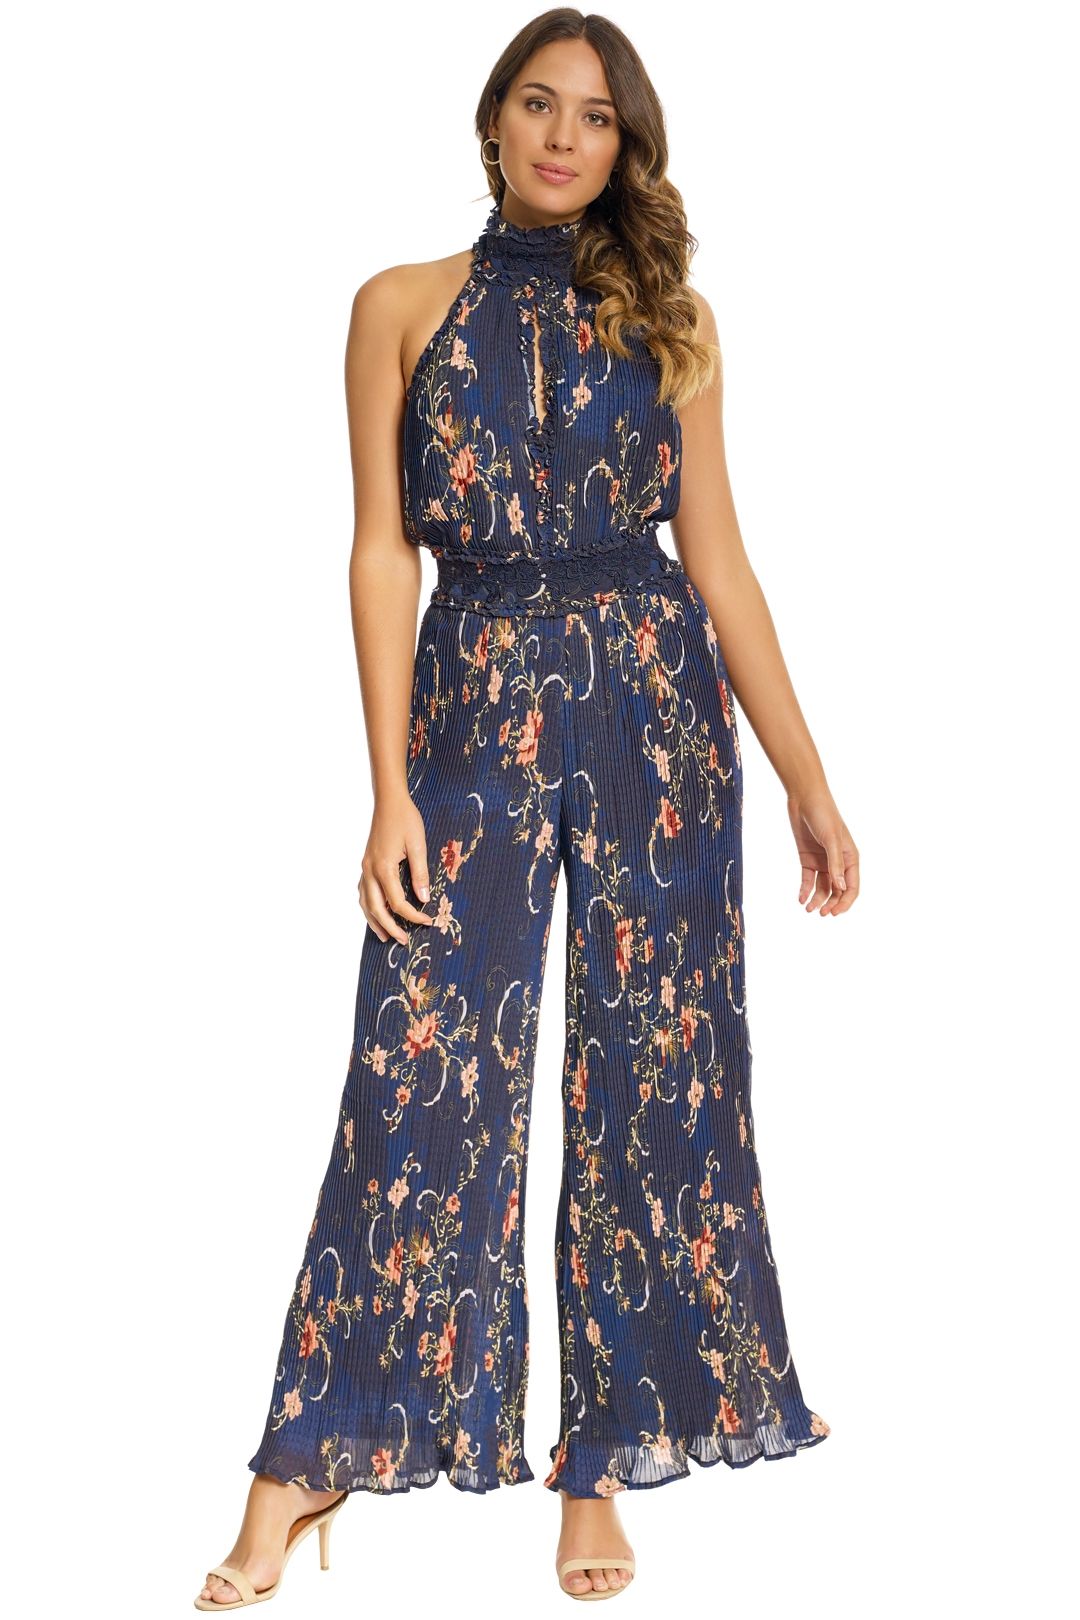 Adele Pleated Jumpsuit by We Are Kindred for Hire